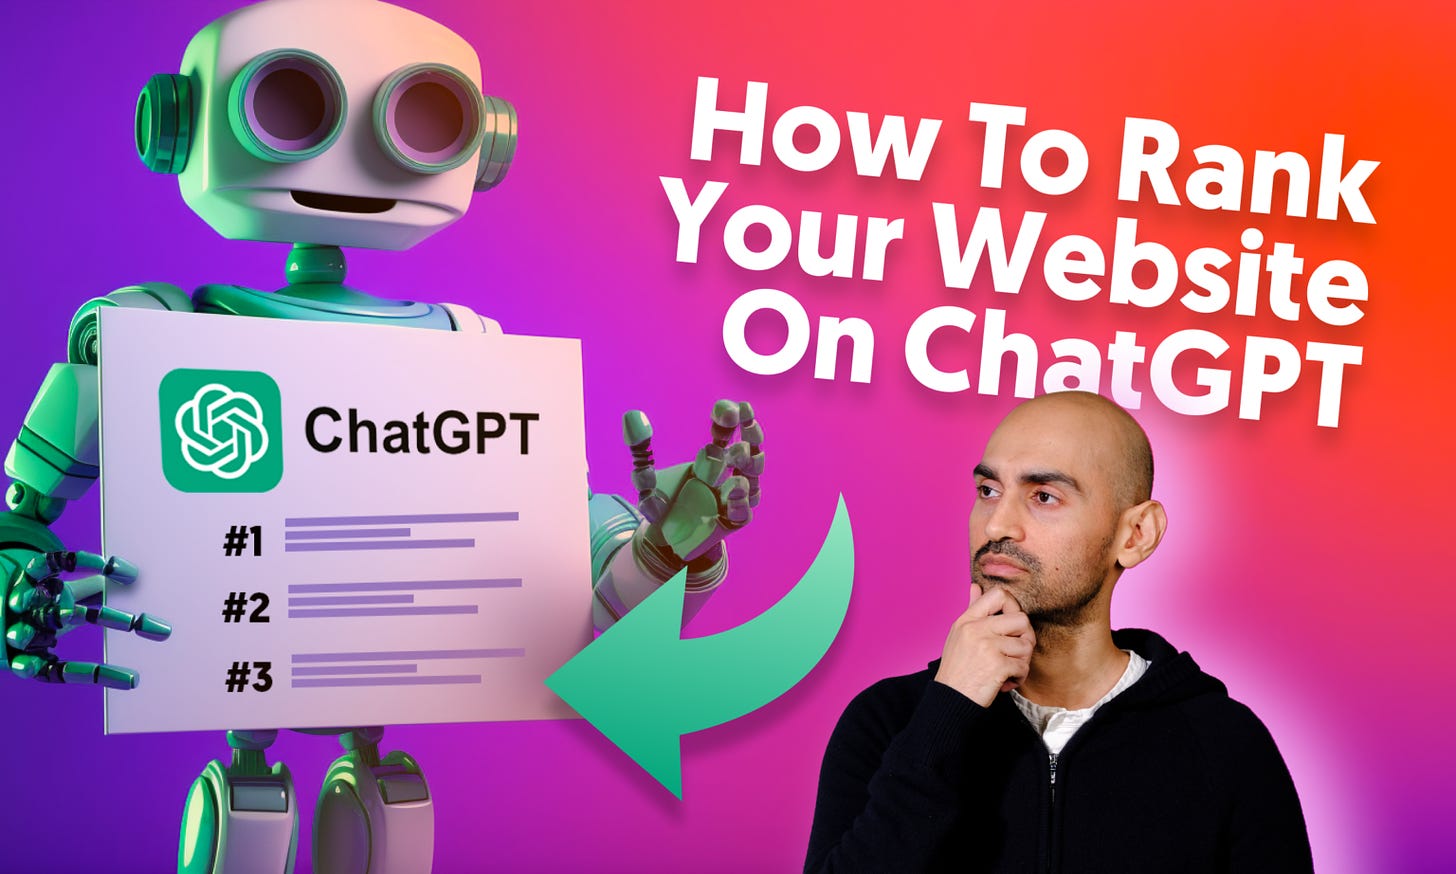 Neil Patel: How to Tank Your Website on ChatGPT